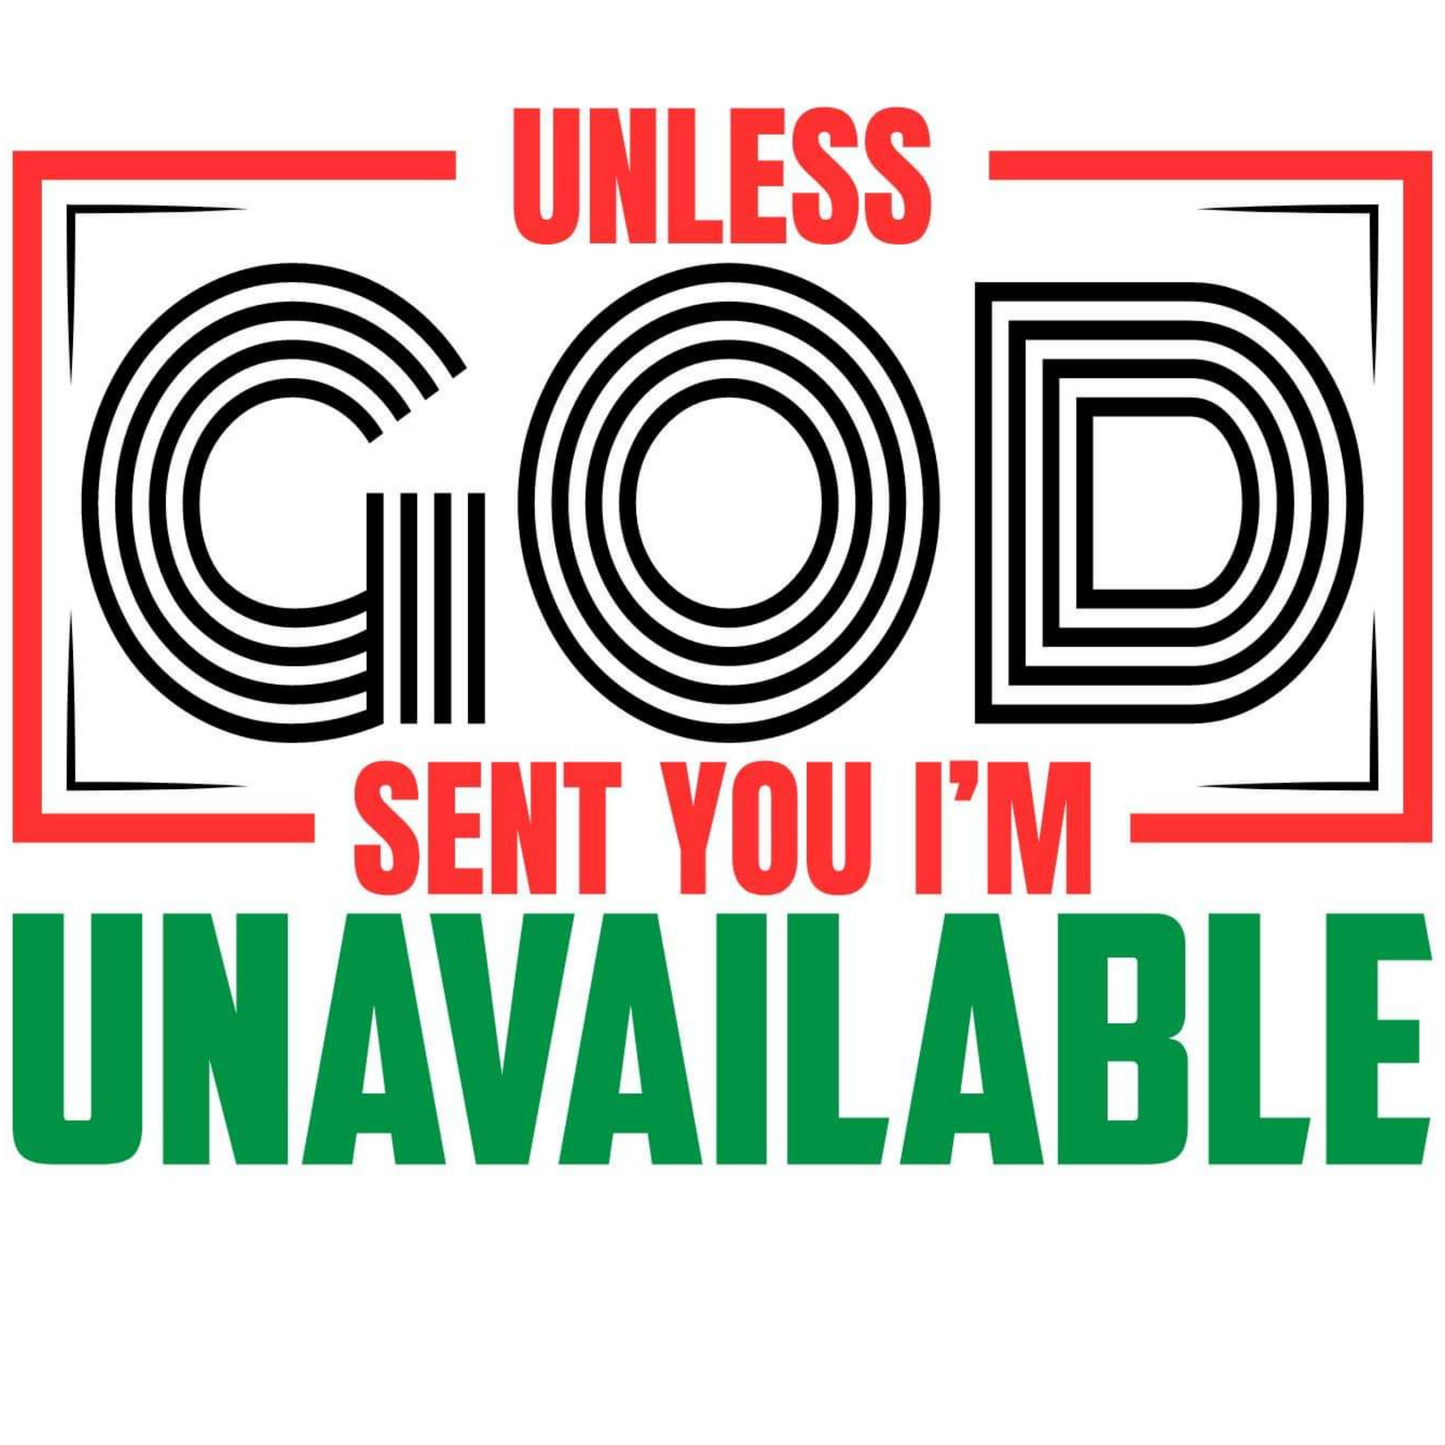 UNLESS GOD SENT YOU TEE - MULTIPLE COLORS AVAILABLE